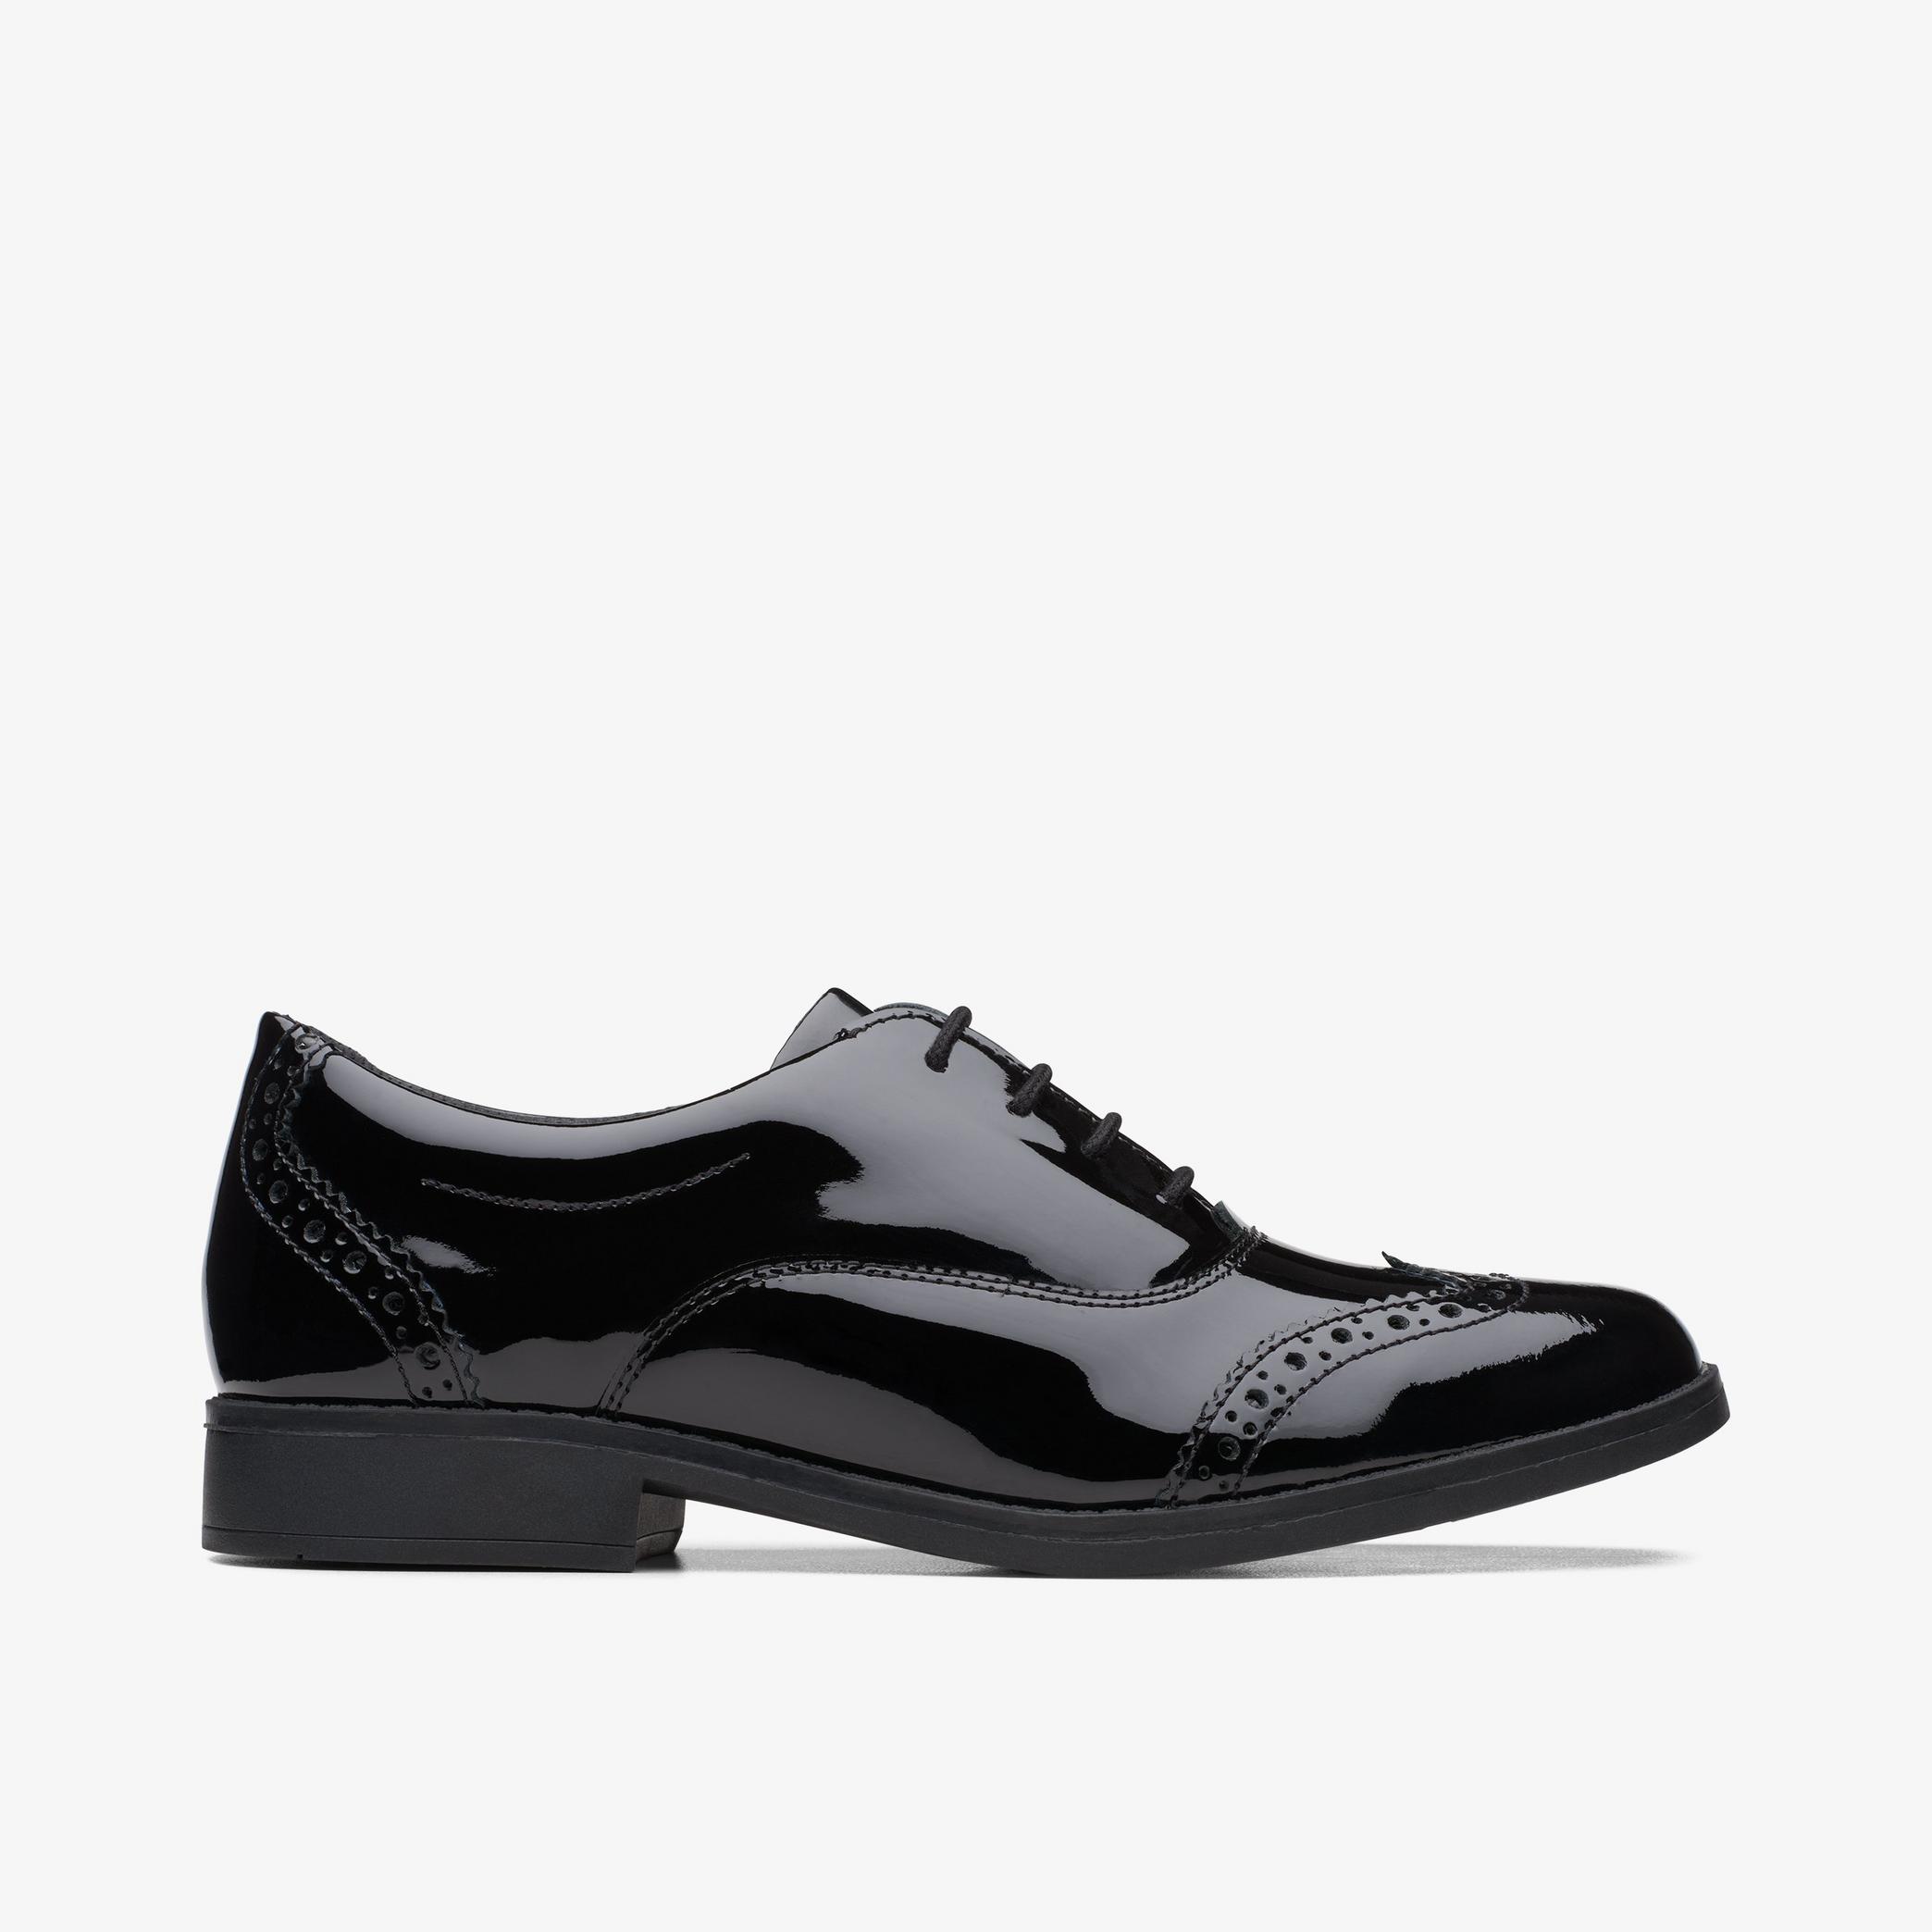 Girls Aubrie Tap Youth Black Patent Brogues | Clarks UK